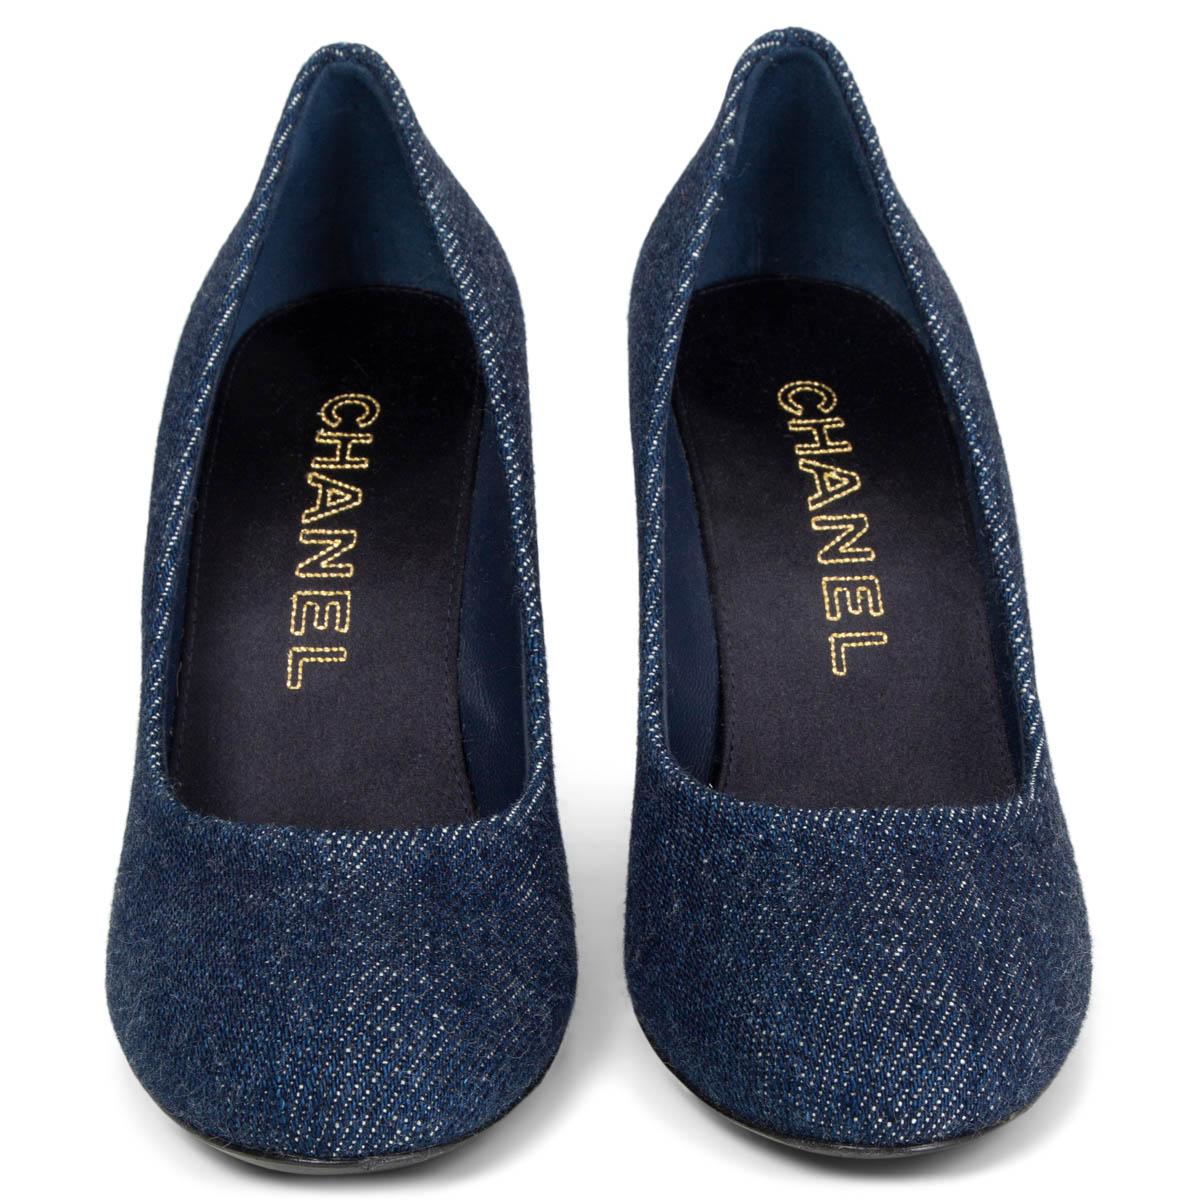 100% authentic Chanel pumps in navy blue denim with a gold-tone metal detail around the heel and a little chain-link CC logo on the side. Have been worn once or twice and are in excellent condition. Come with dust bag. 

Measurements
Imprinted